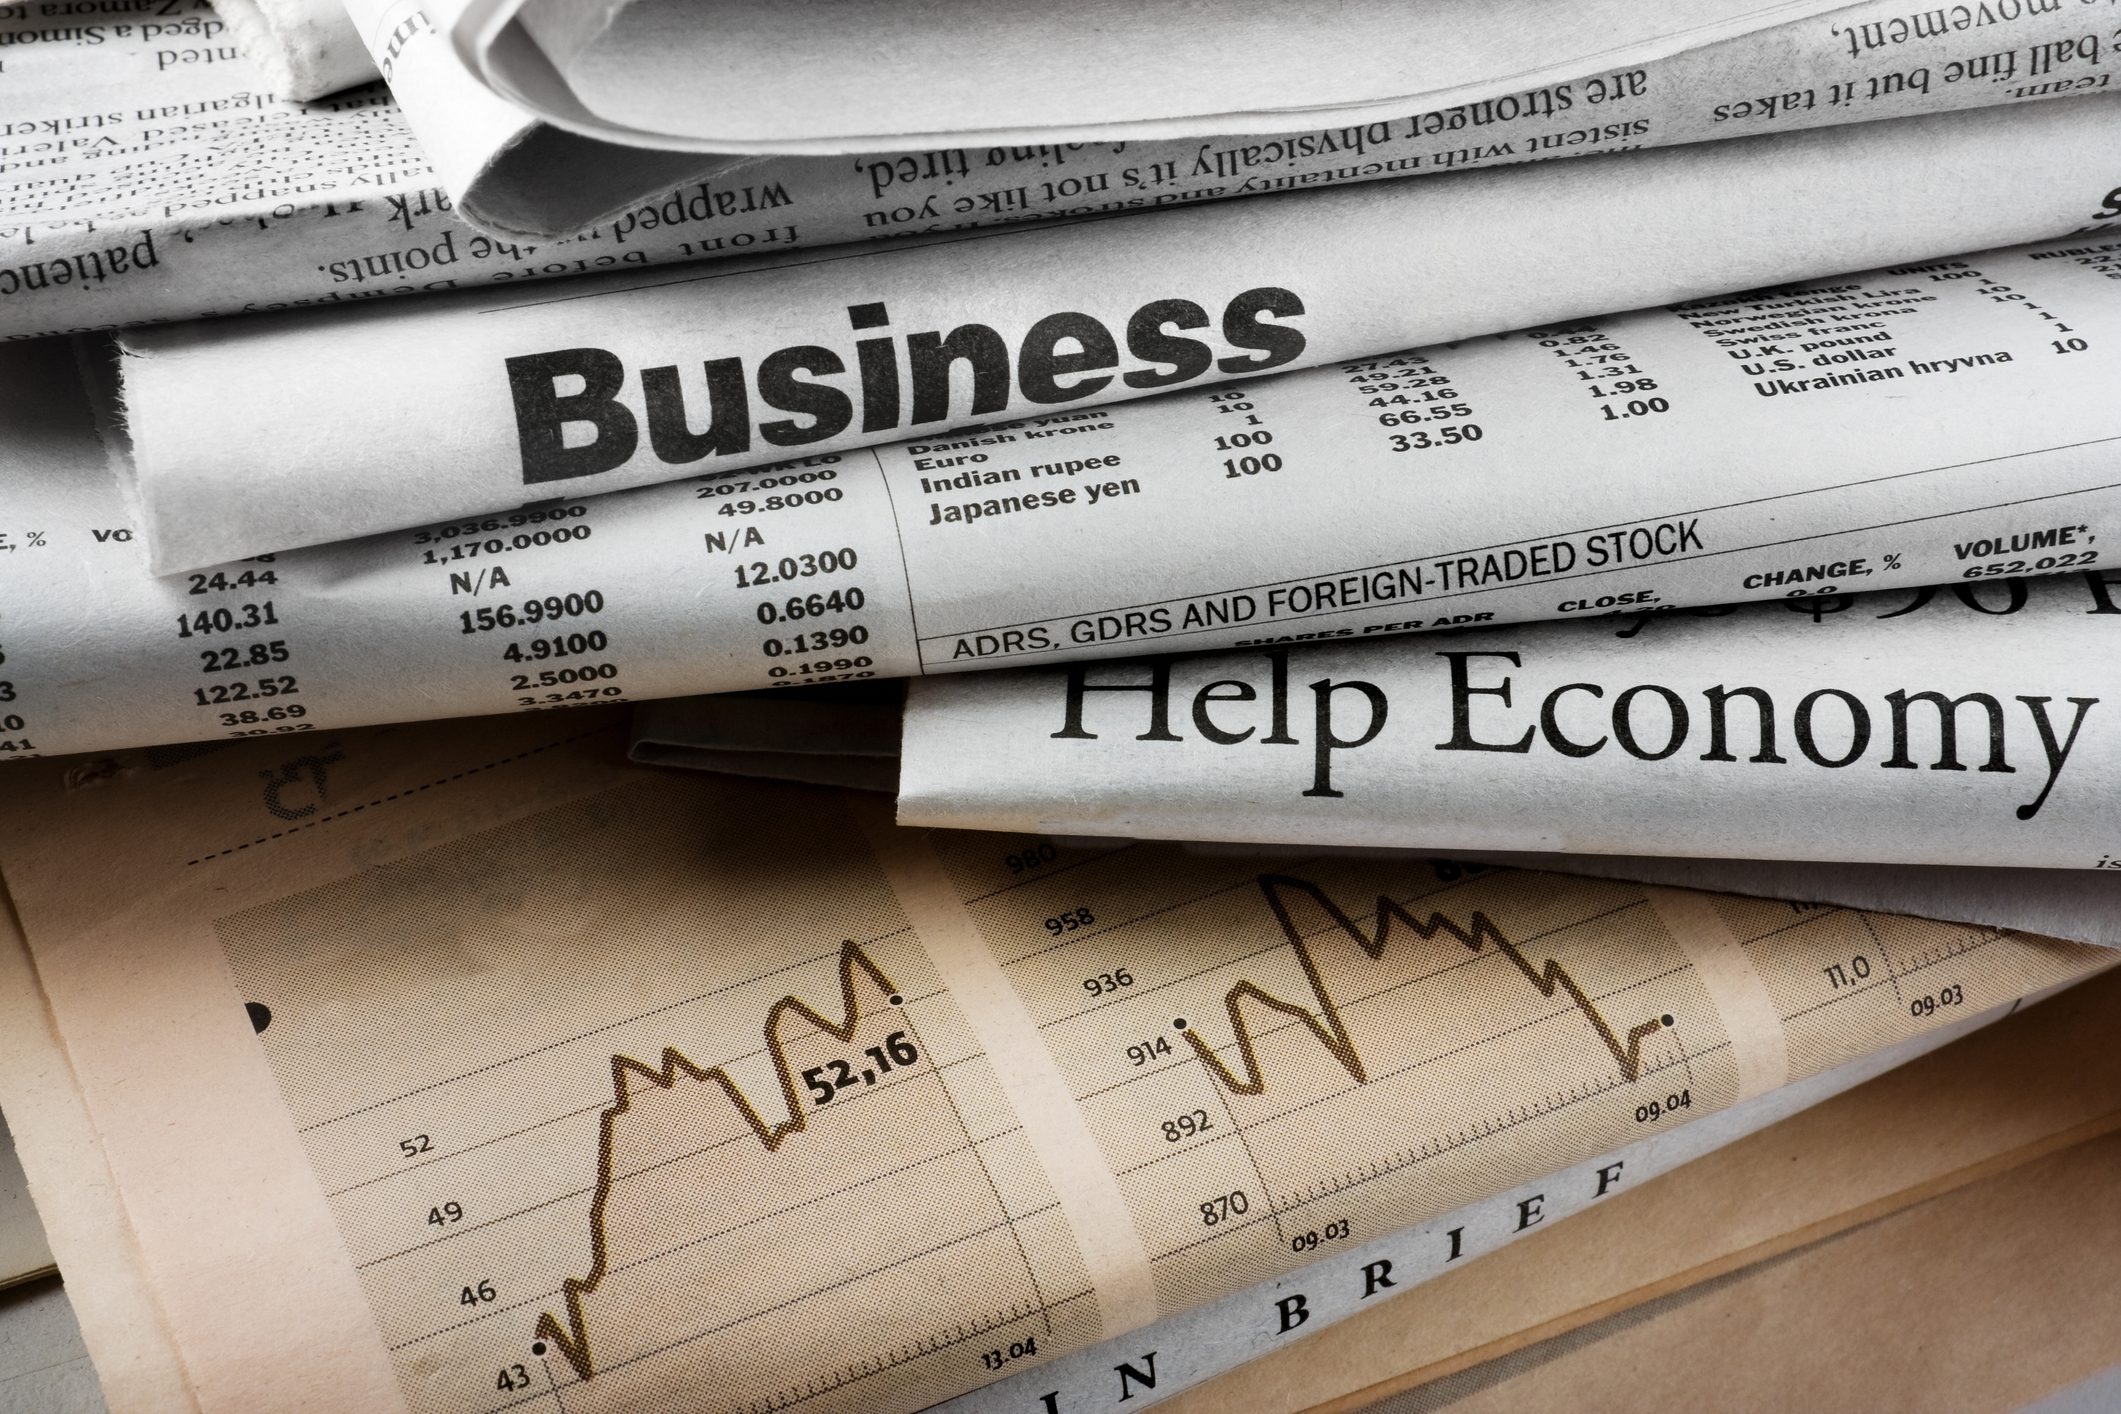 Newspapers discussing the economic topics such as soft landings and stock prices